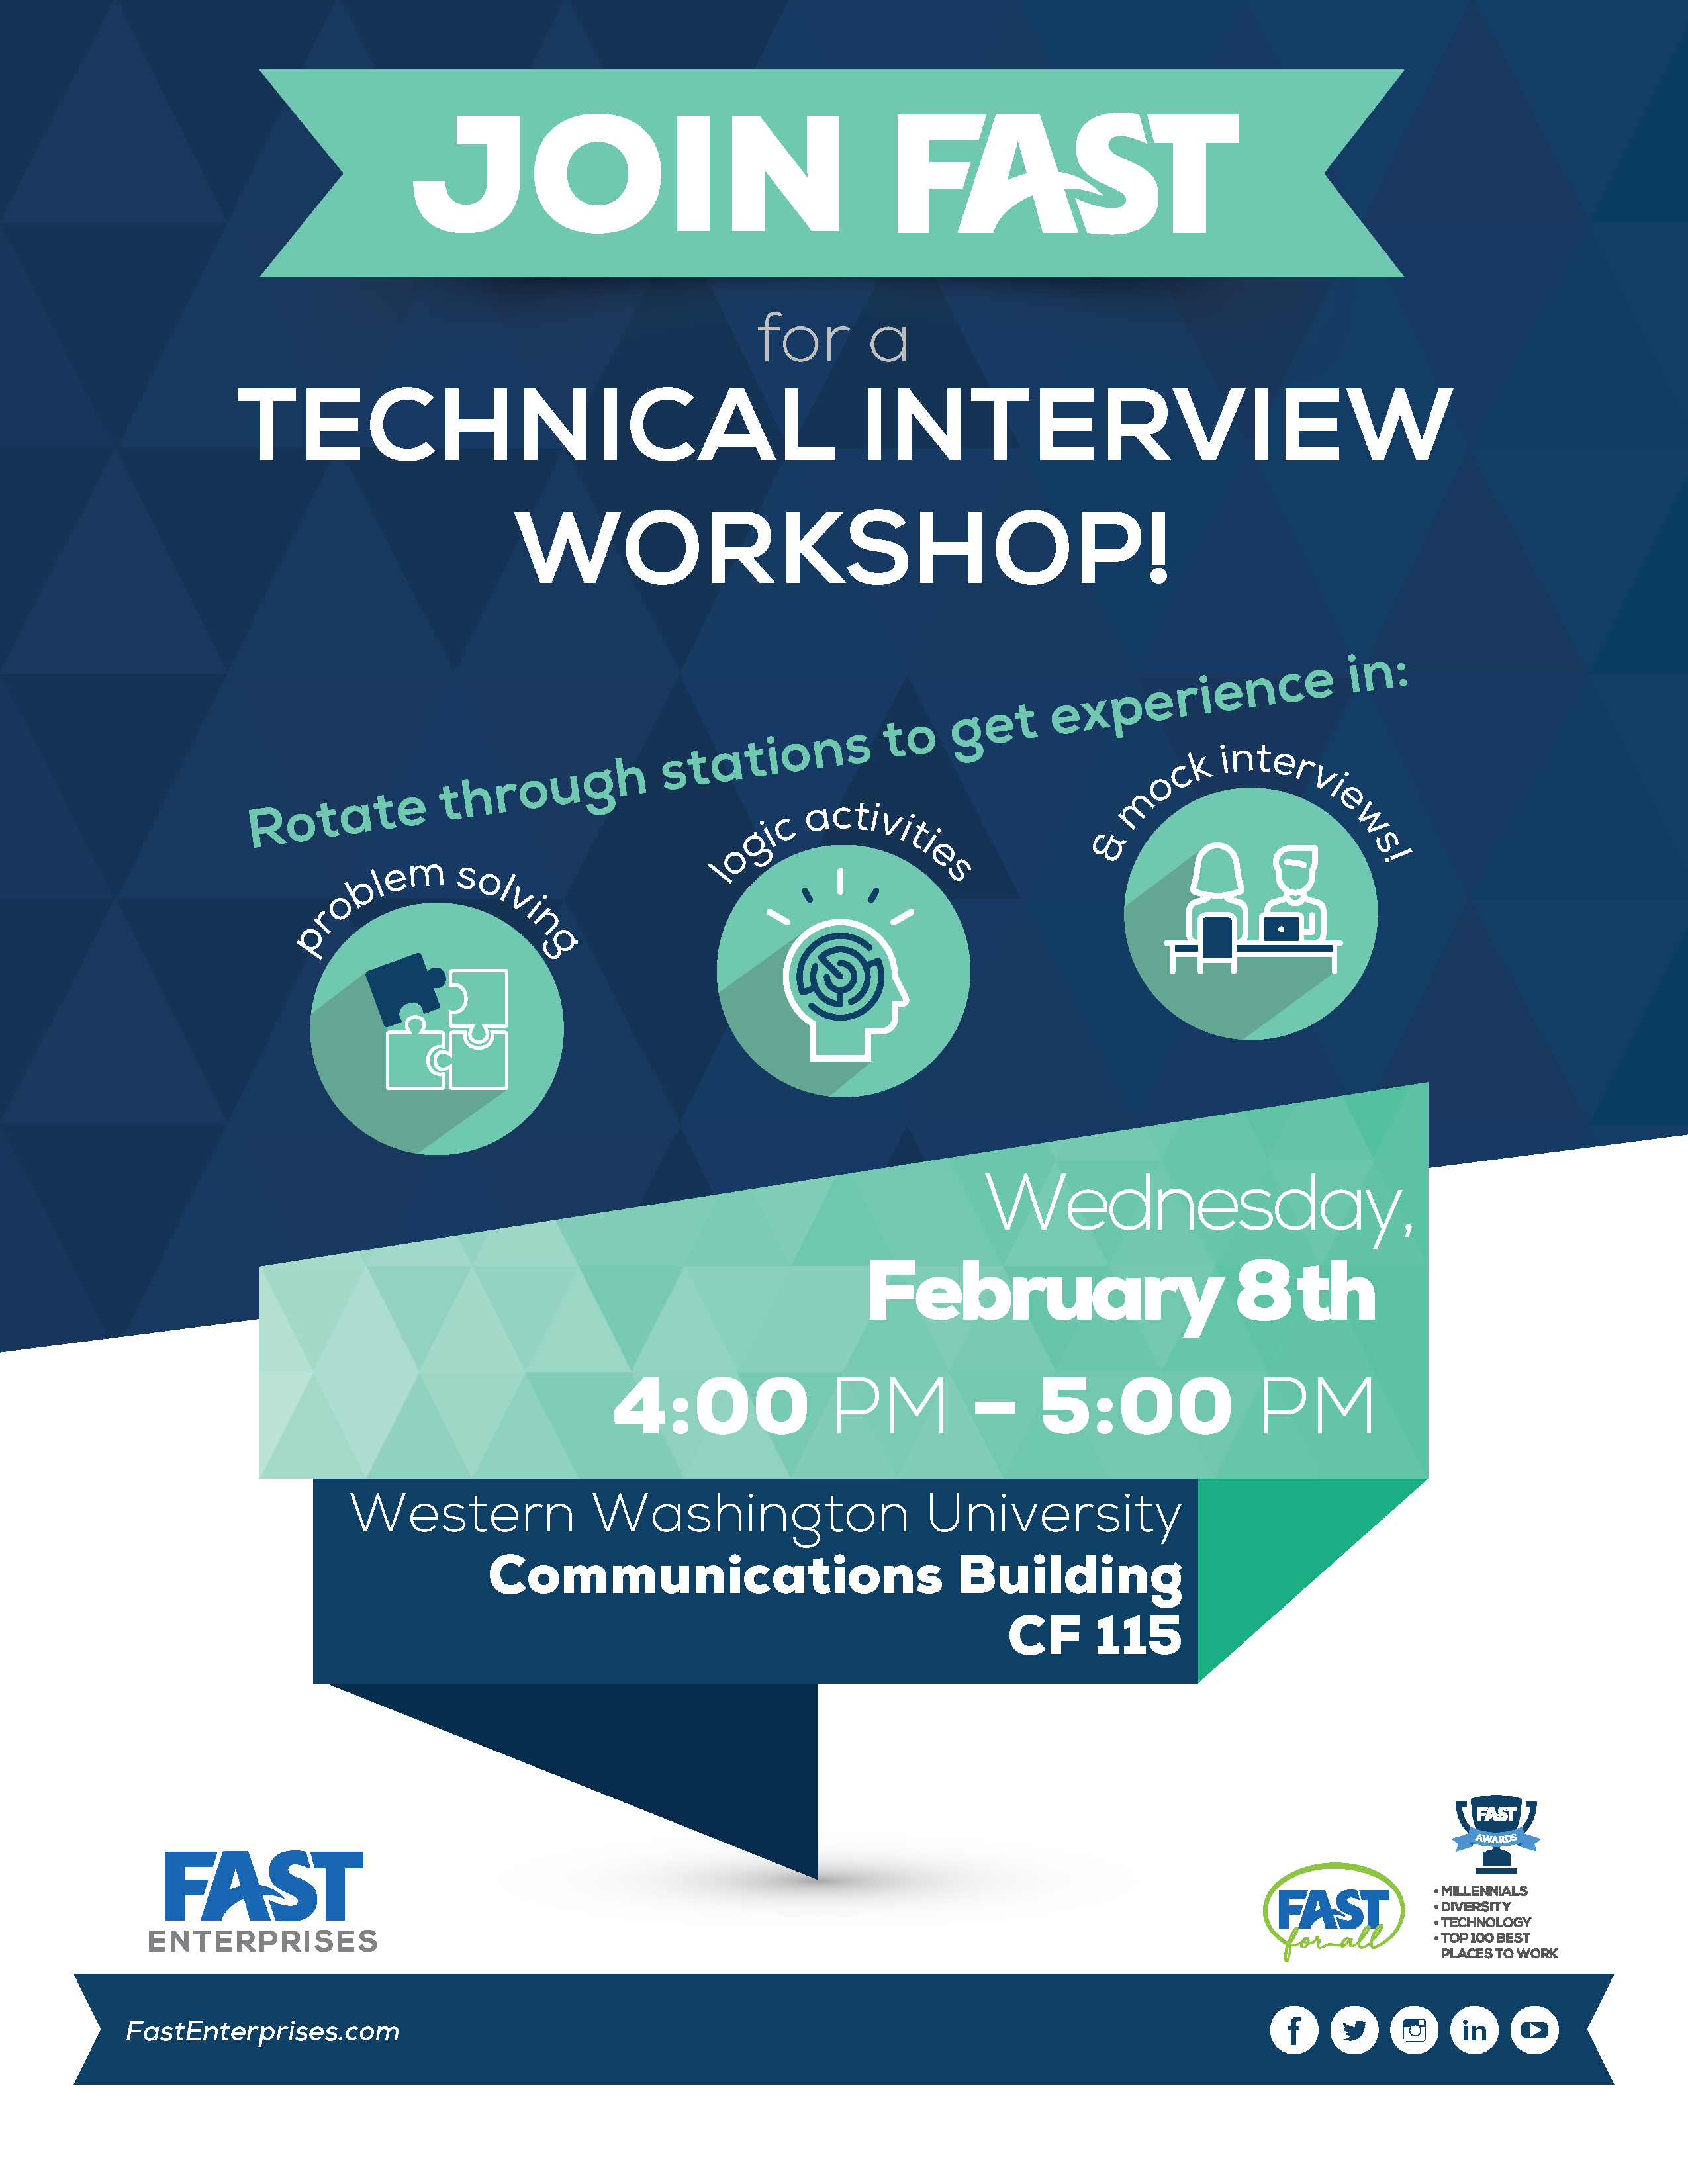 Technical Interview Workshop with Fast Enterprises! February 8th, 4:00-5:00 PM, in CF 115.